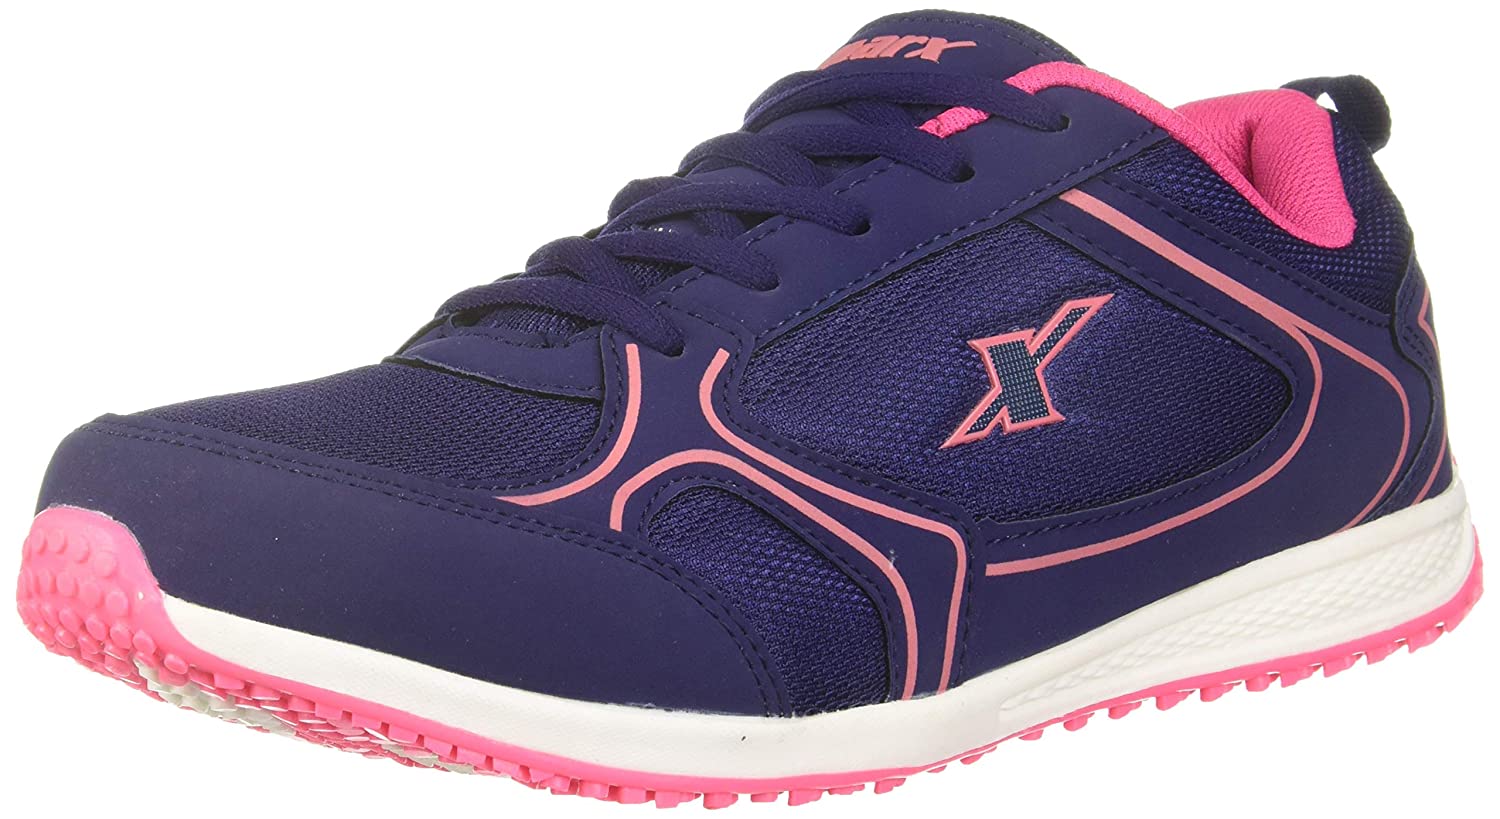 Best Running Shoes For Ladies